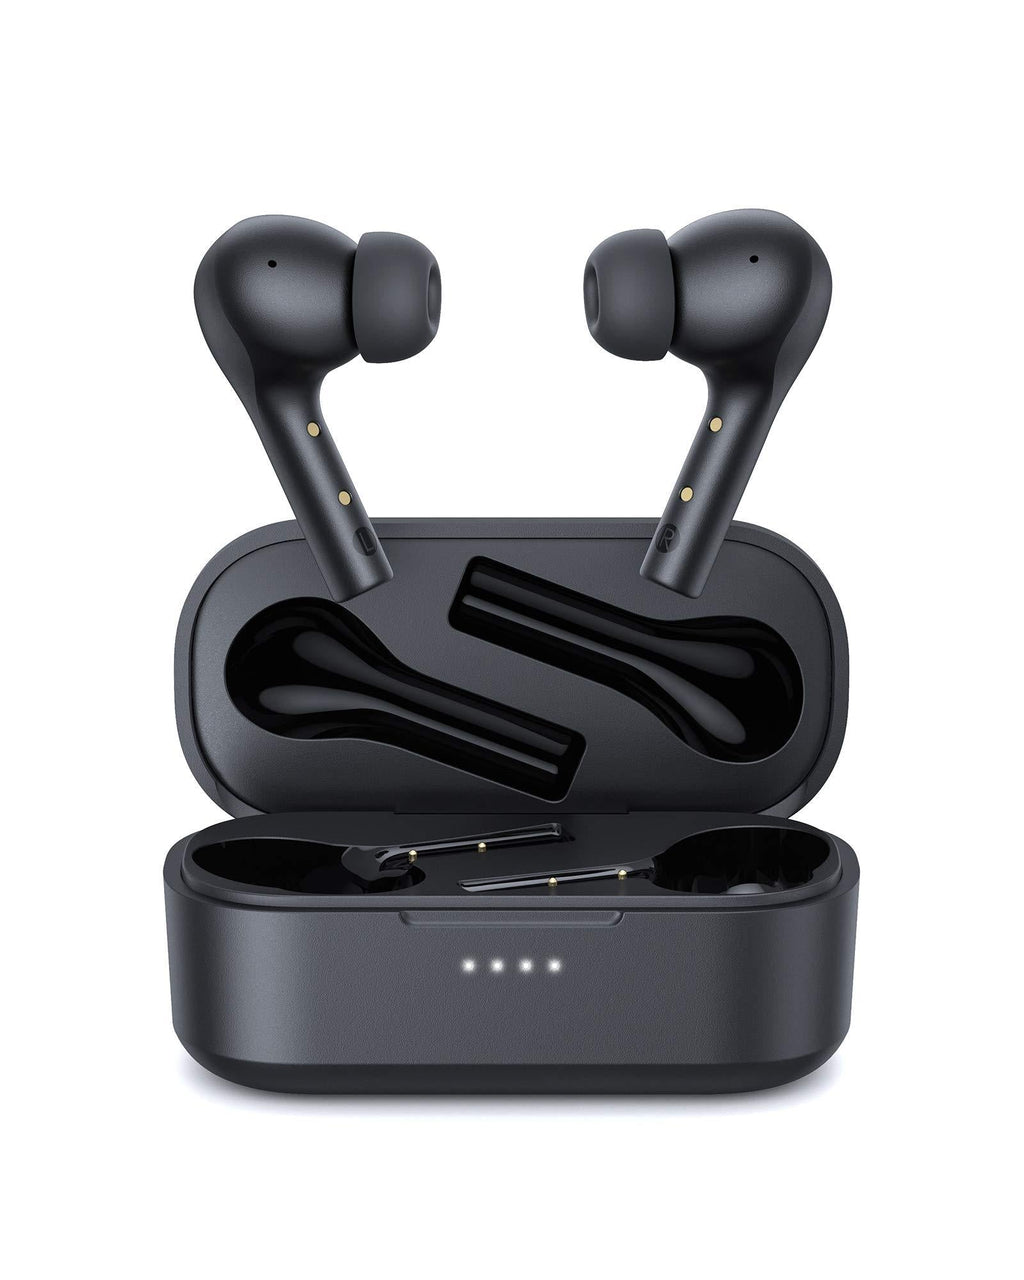  [AUSTRALIA] - True Wireless Earbuds Noise Cancelling with 4 Microphones, WENKEY Bluetooth Headphones with 5 Sizes Tips for iPhone, Android, IPX6 Waterproof, 30H Playtime, TWS Bluetooth Earphones with Charging Case Black